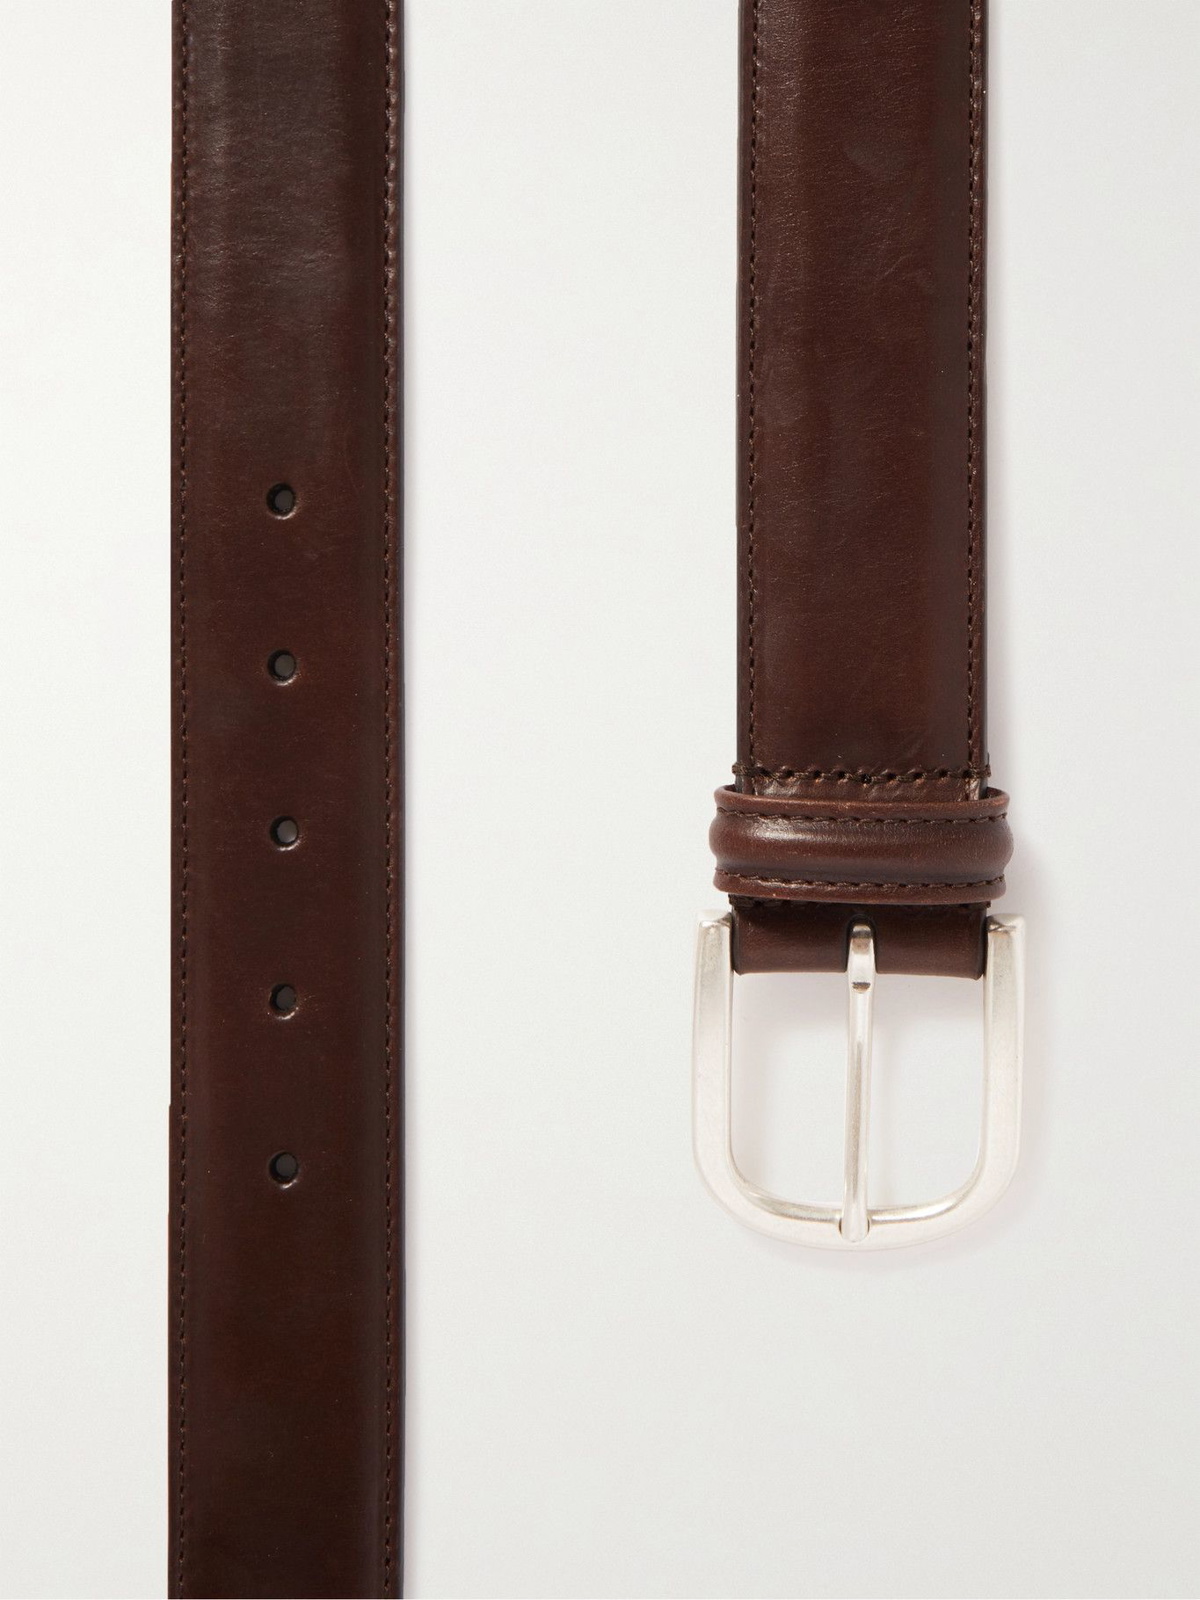 ANDERSON'S - 3cm Burnished-Leather Belt - Brown Anderson's